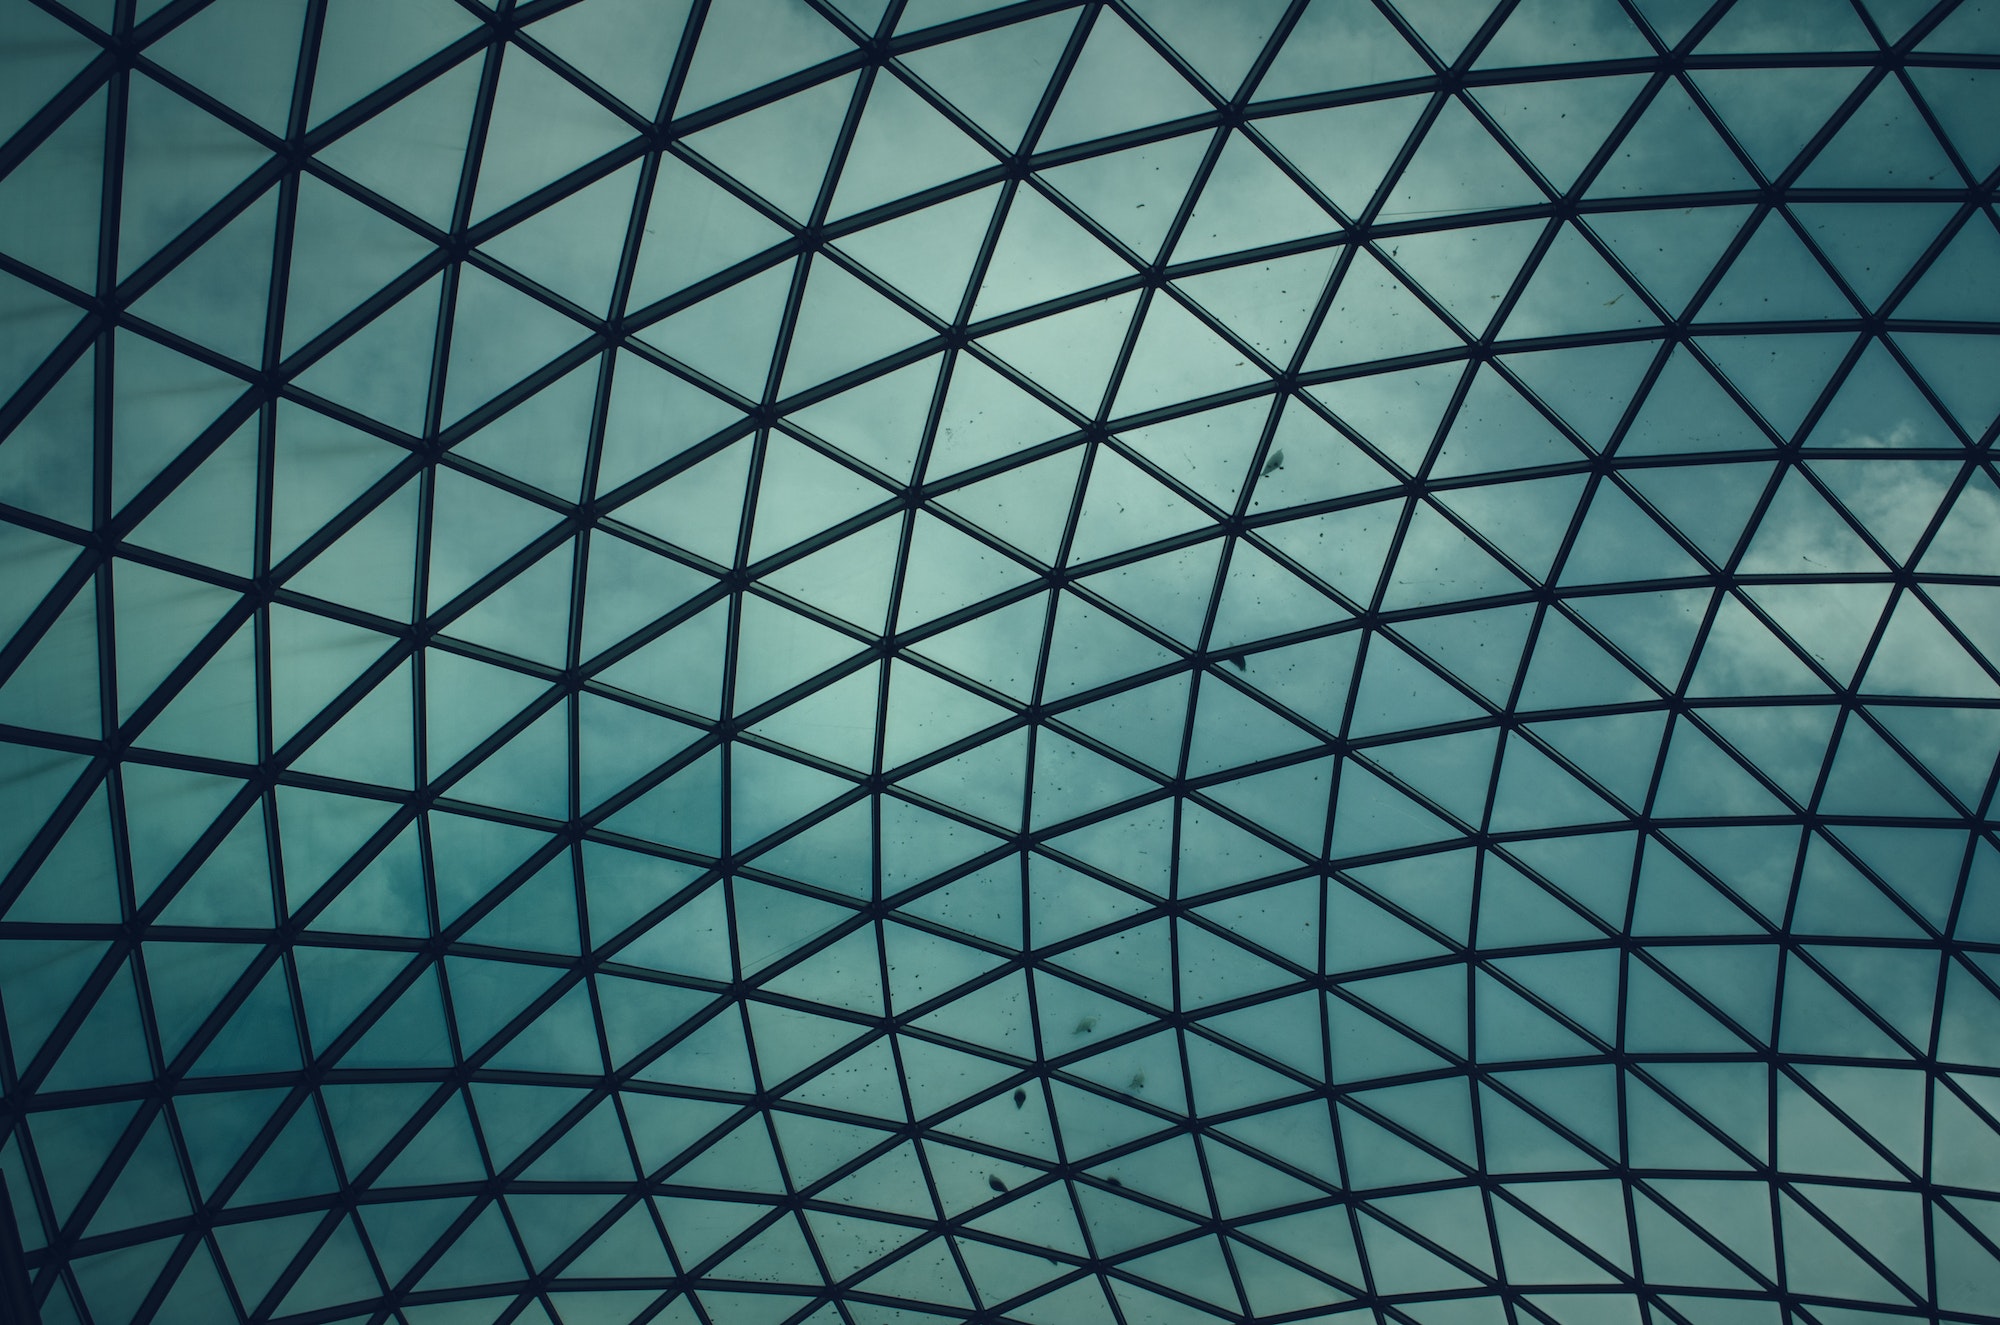 Low angle view of the ceiling of The British Museum in London in England